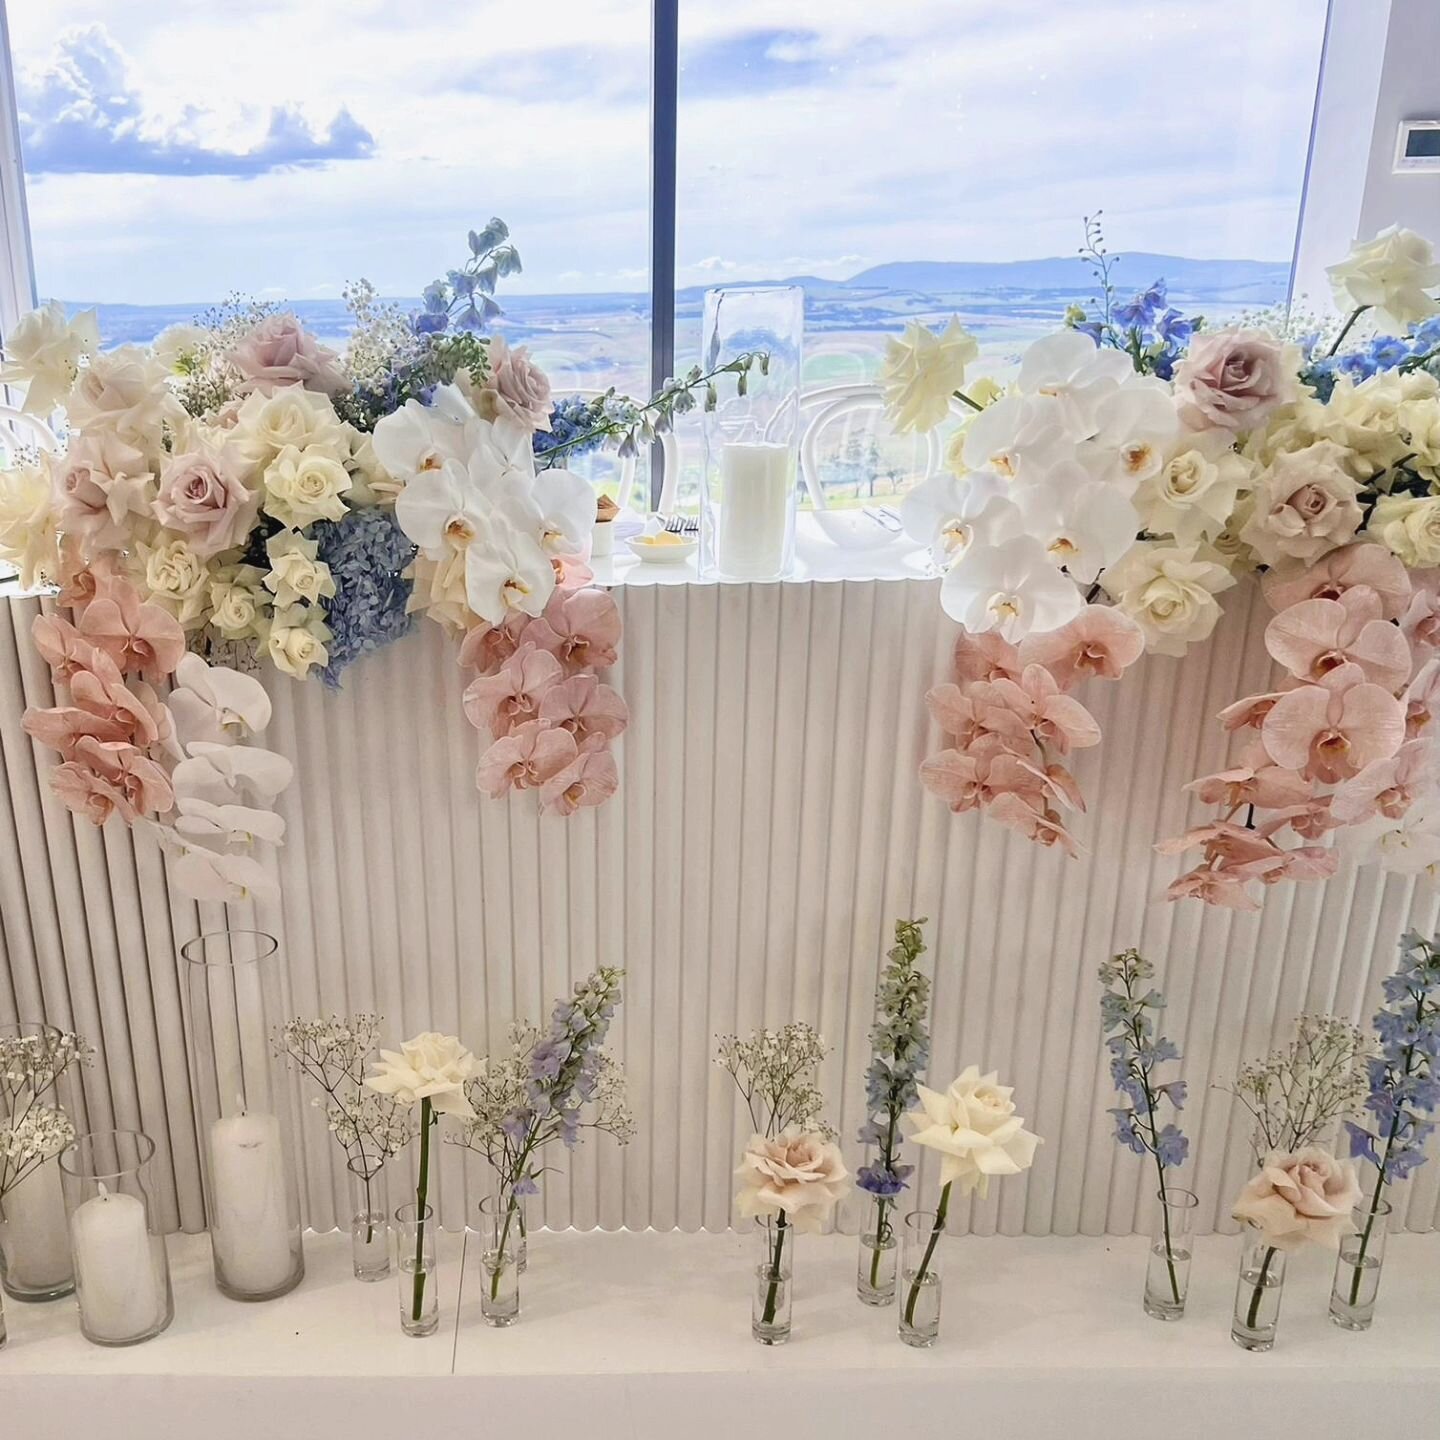 Seeking stunning floral arrangements for your big day?

Reach out to us today to transform your wedding vision into reality with our exquisite floral designs. 

If you love our work, don't hesitate to get in touch!

#weddingfloristmelbourne #weddingm